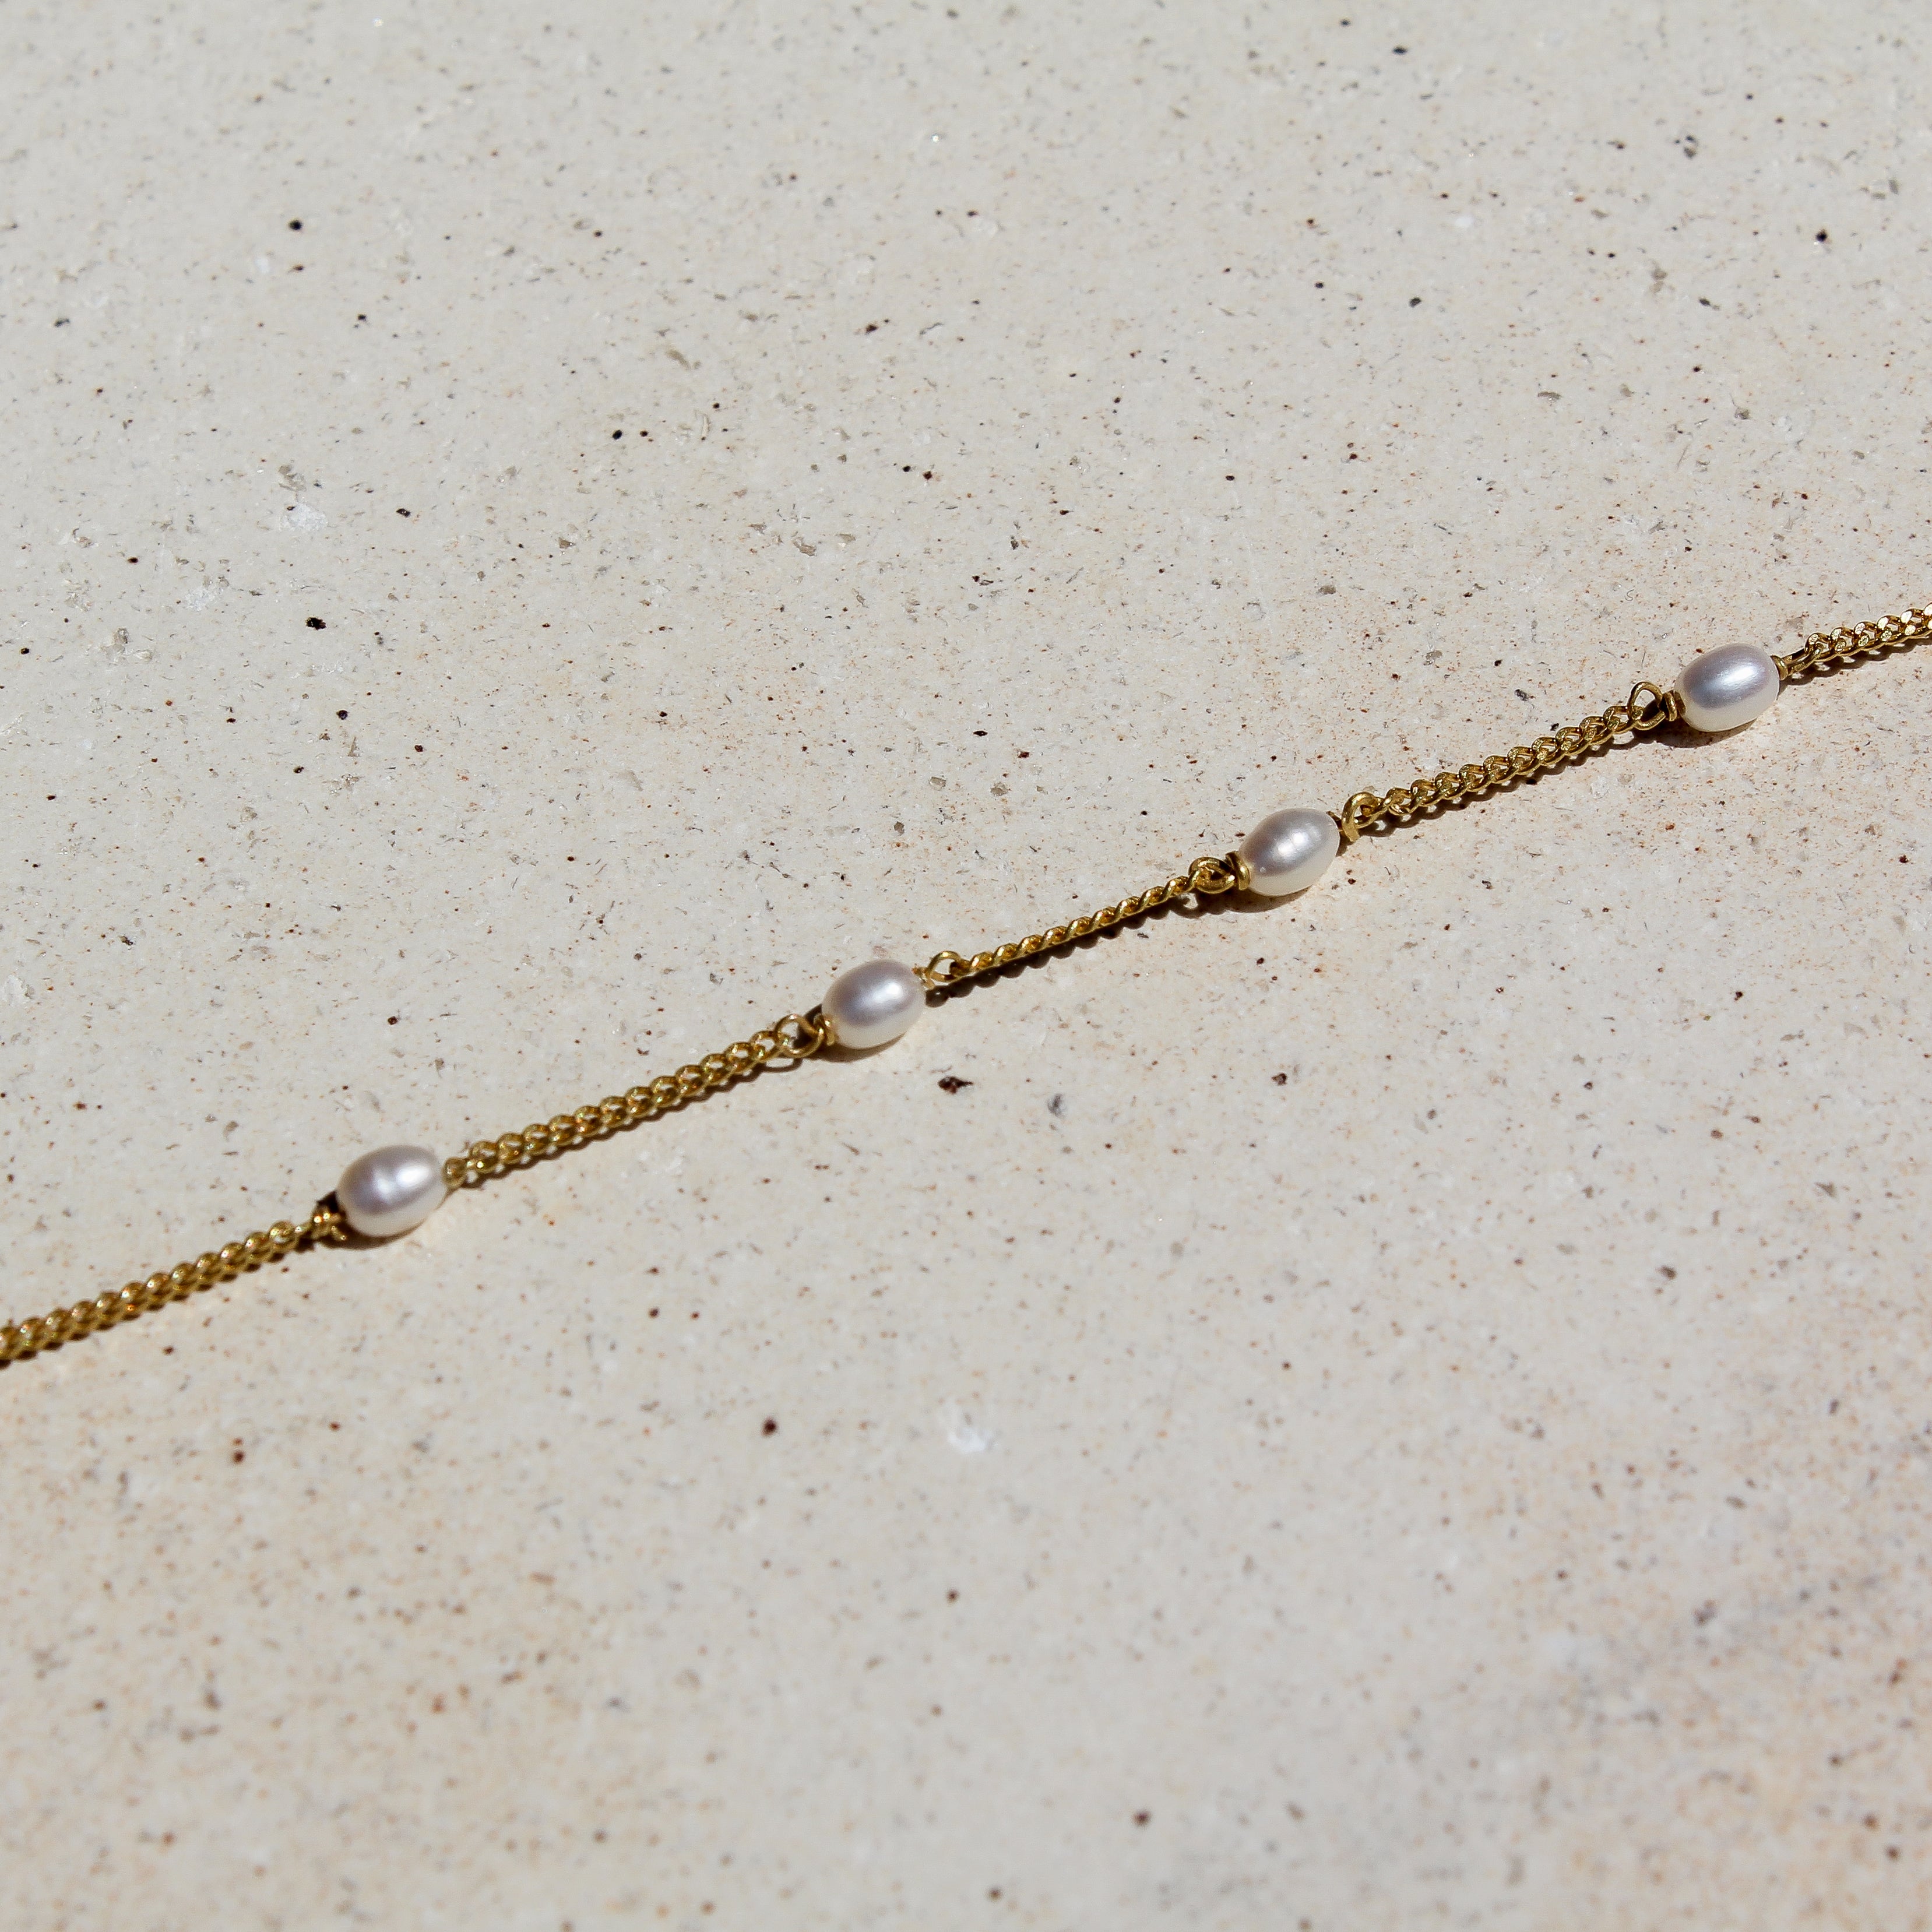 STARDUST BRACELET - FRESH WATER PEARLS (GOLD PLATED)